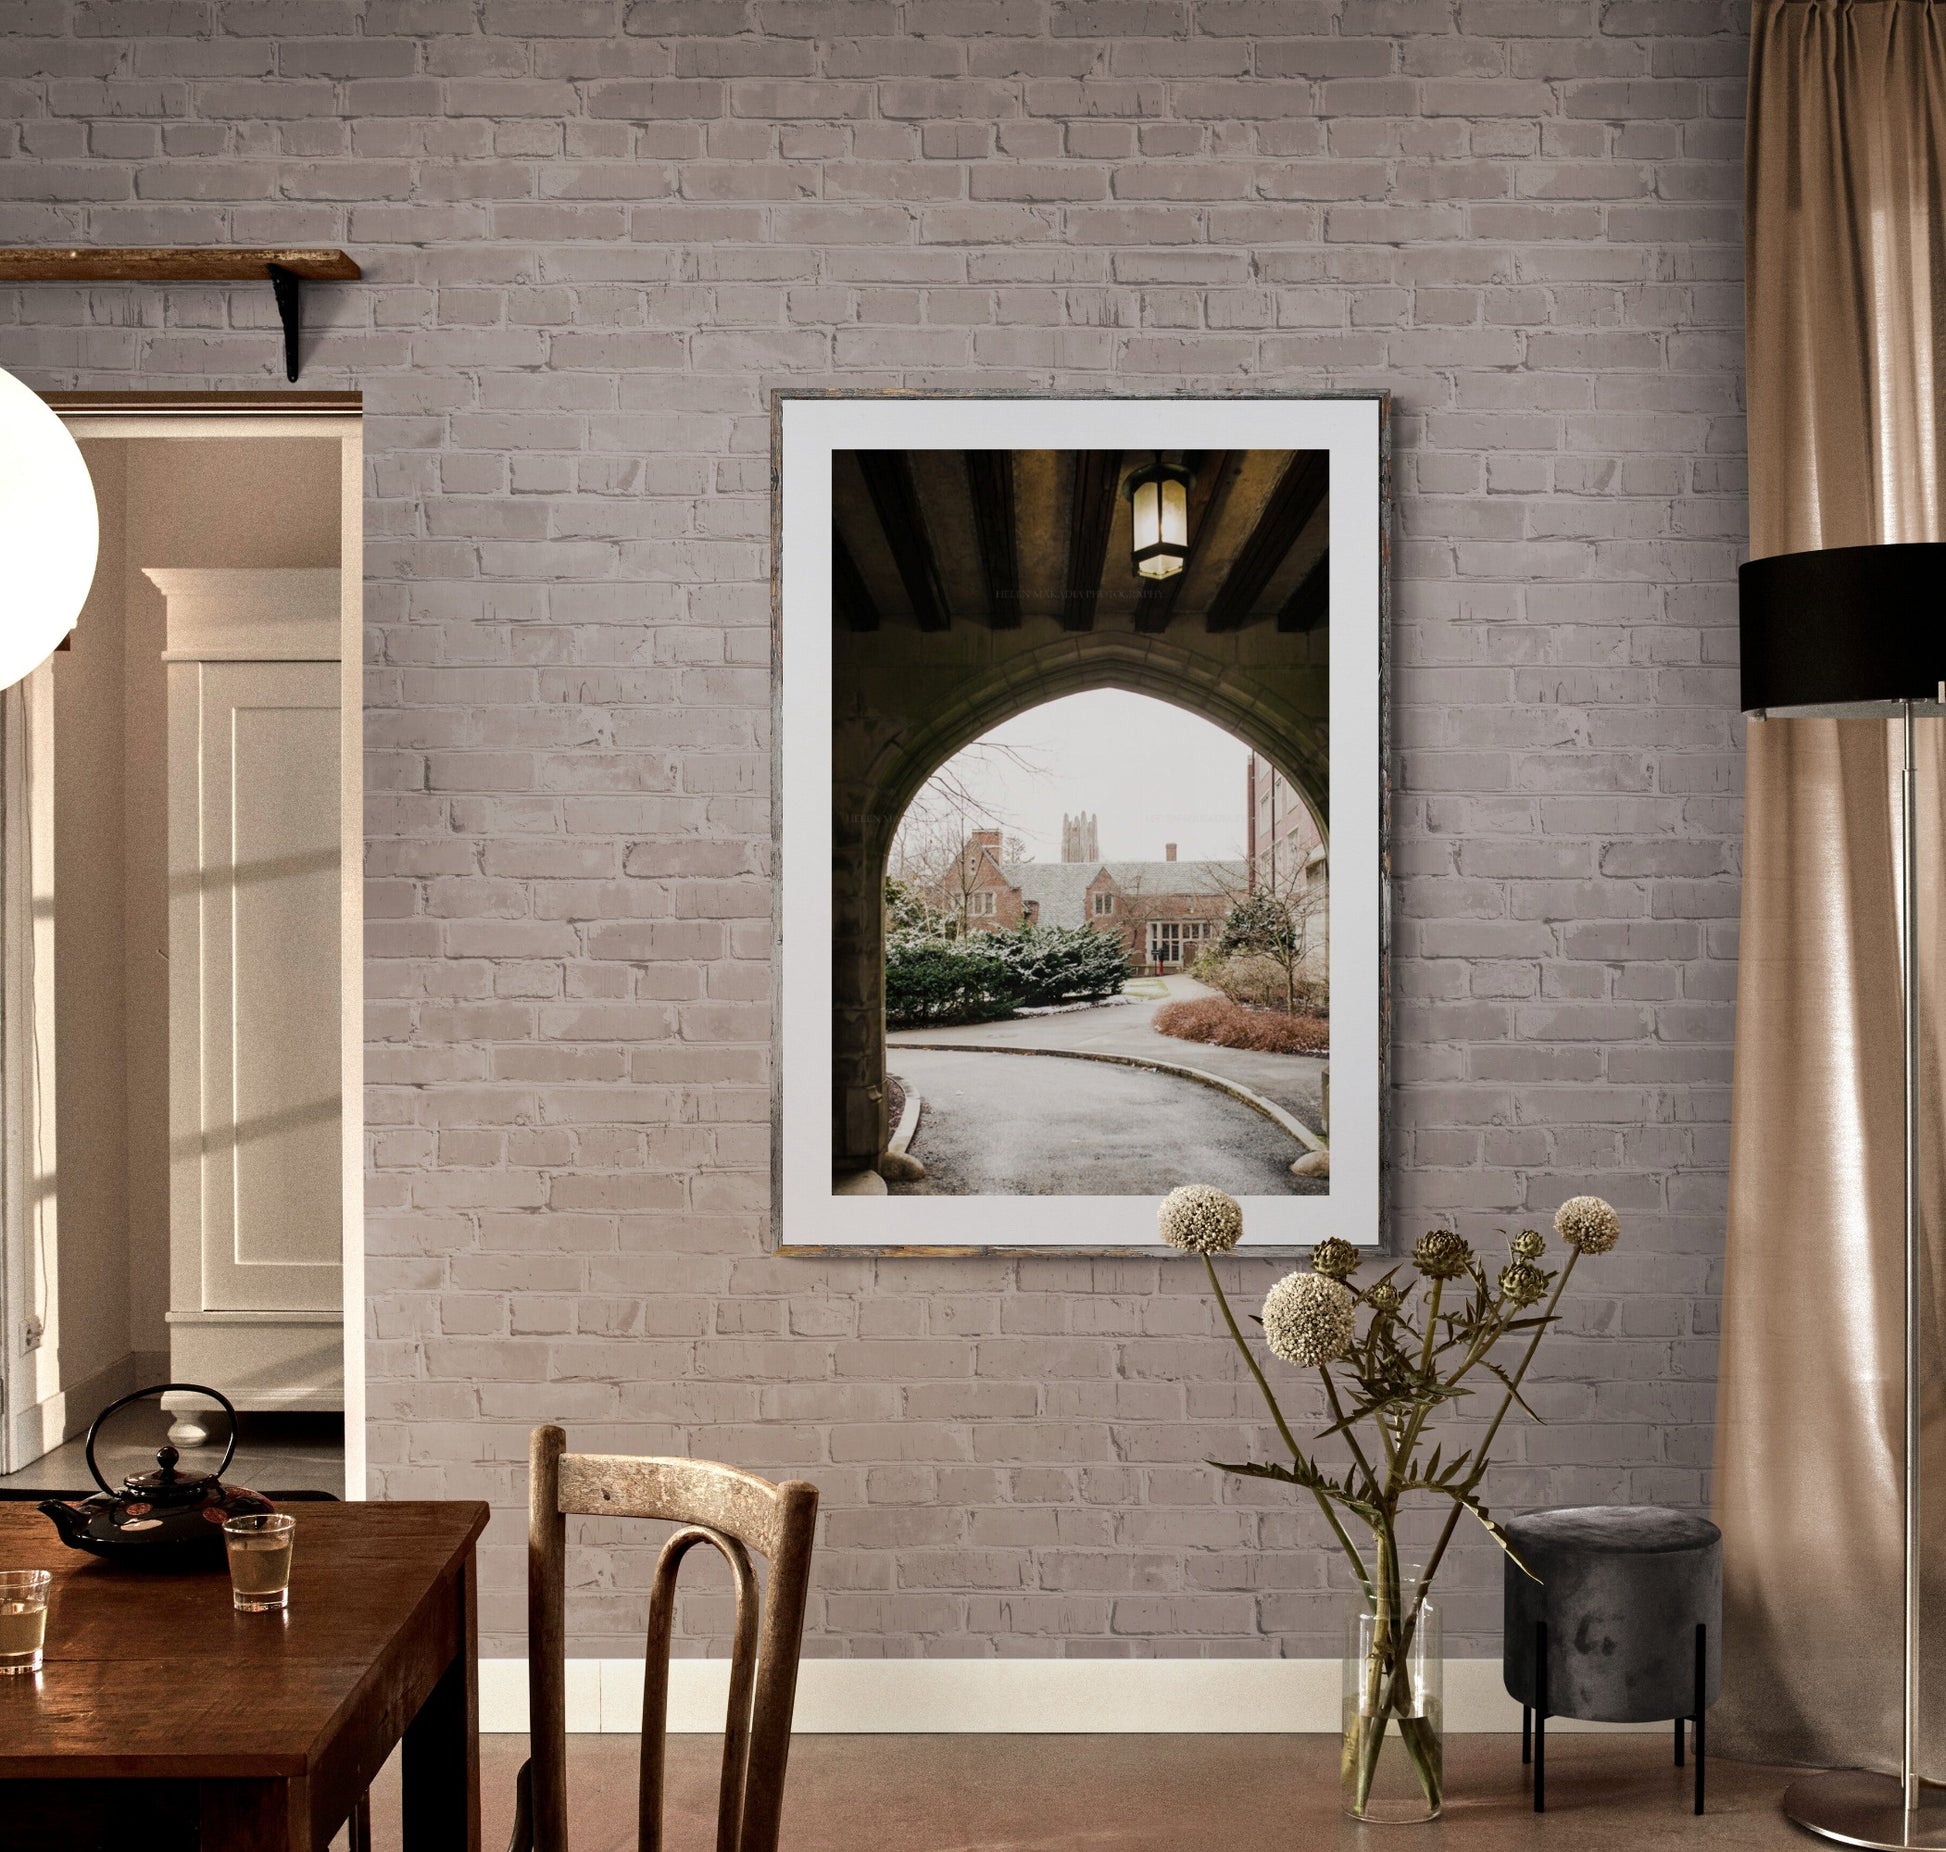 Wellesley College Photograph as Wall Art in a Dining Room